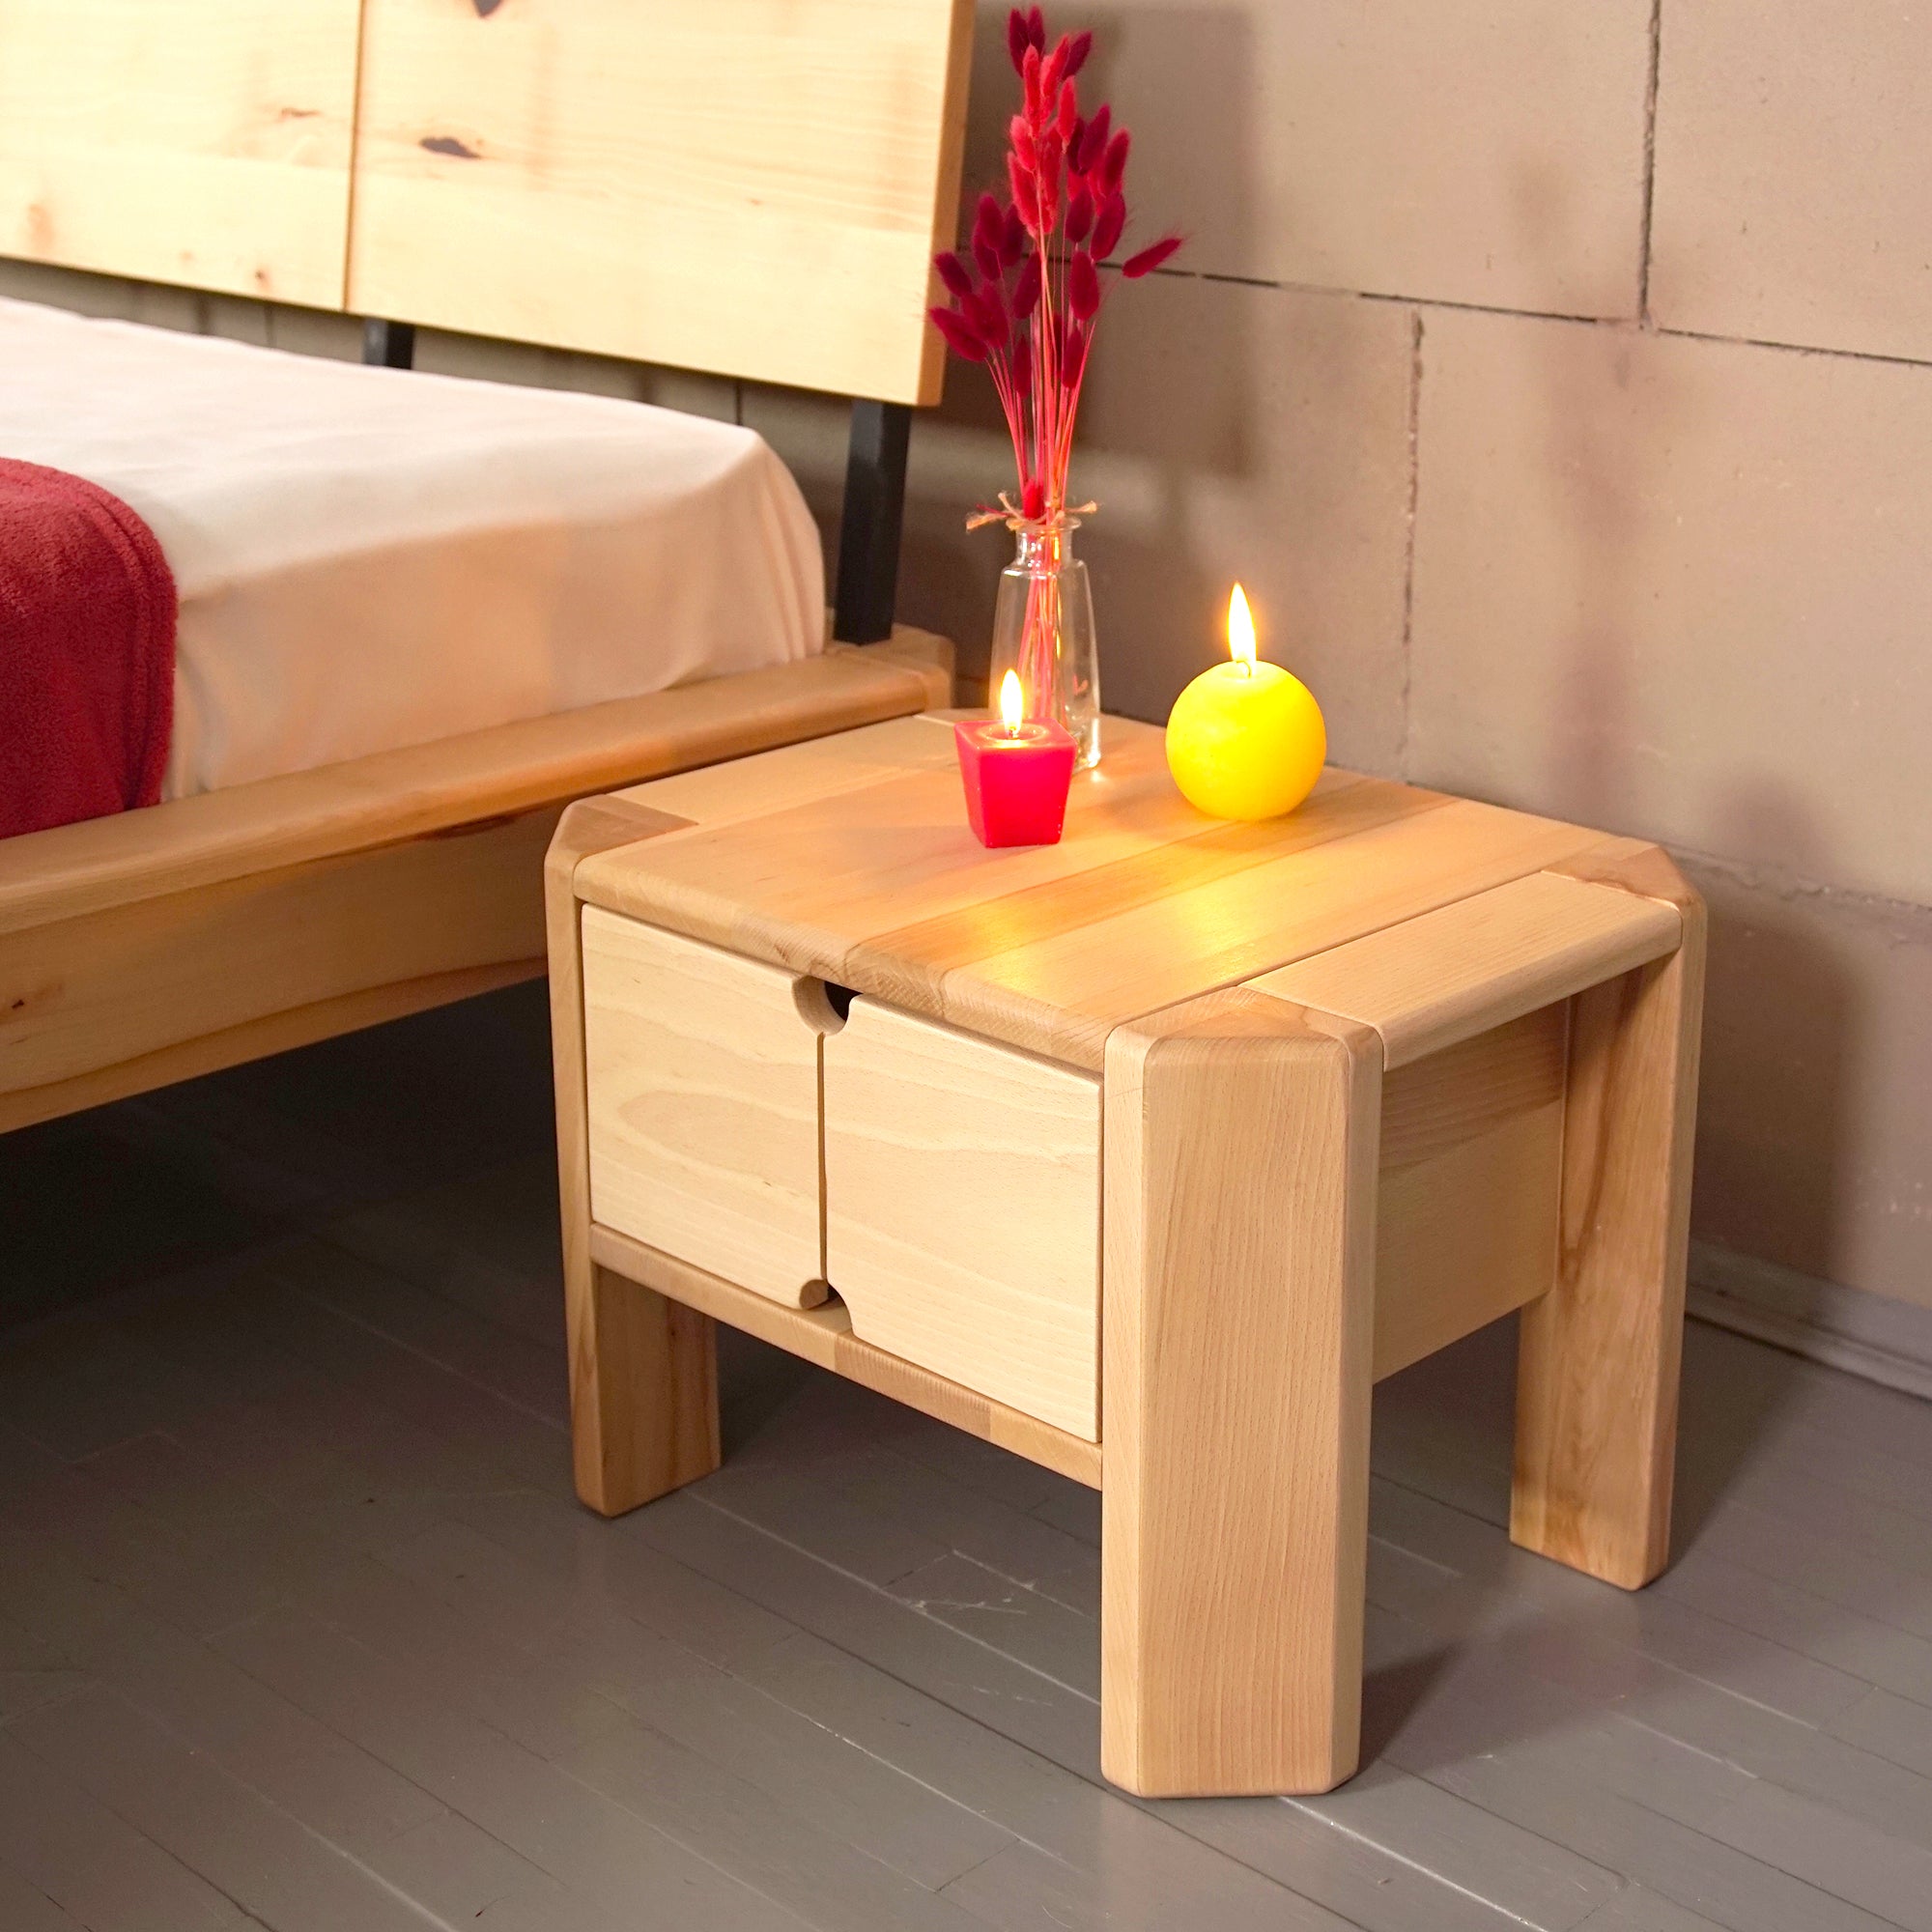 LOFT Bedside Table, Beech Wood-natural colour-with doors-interior view with candles